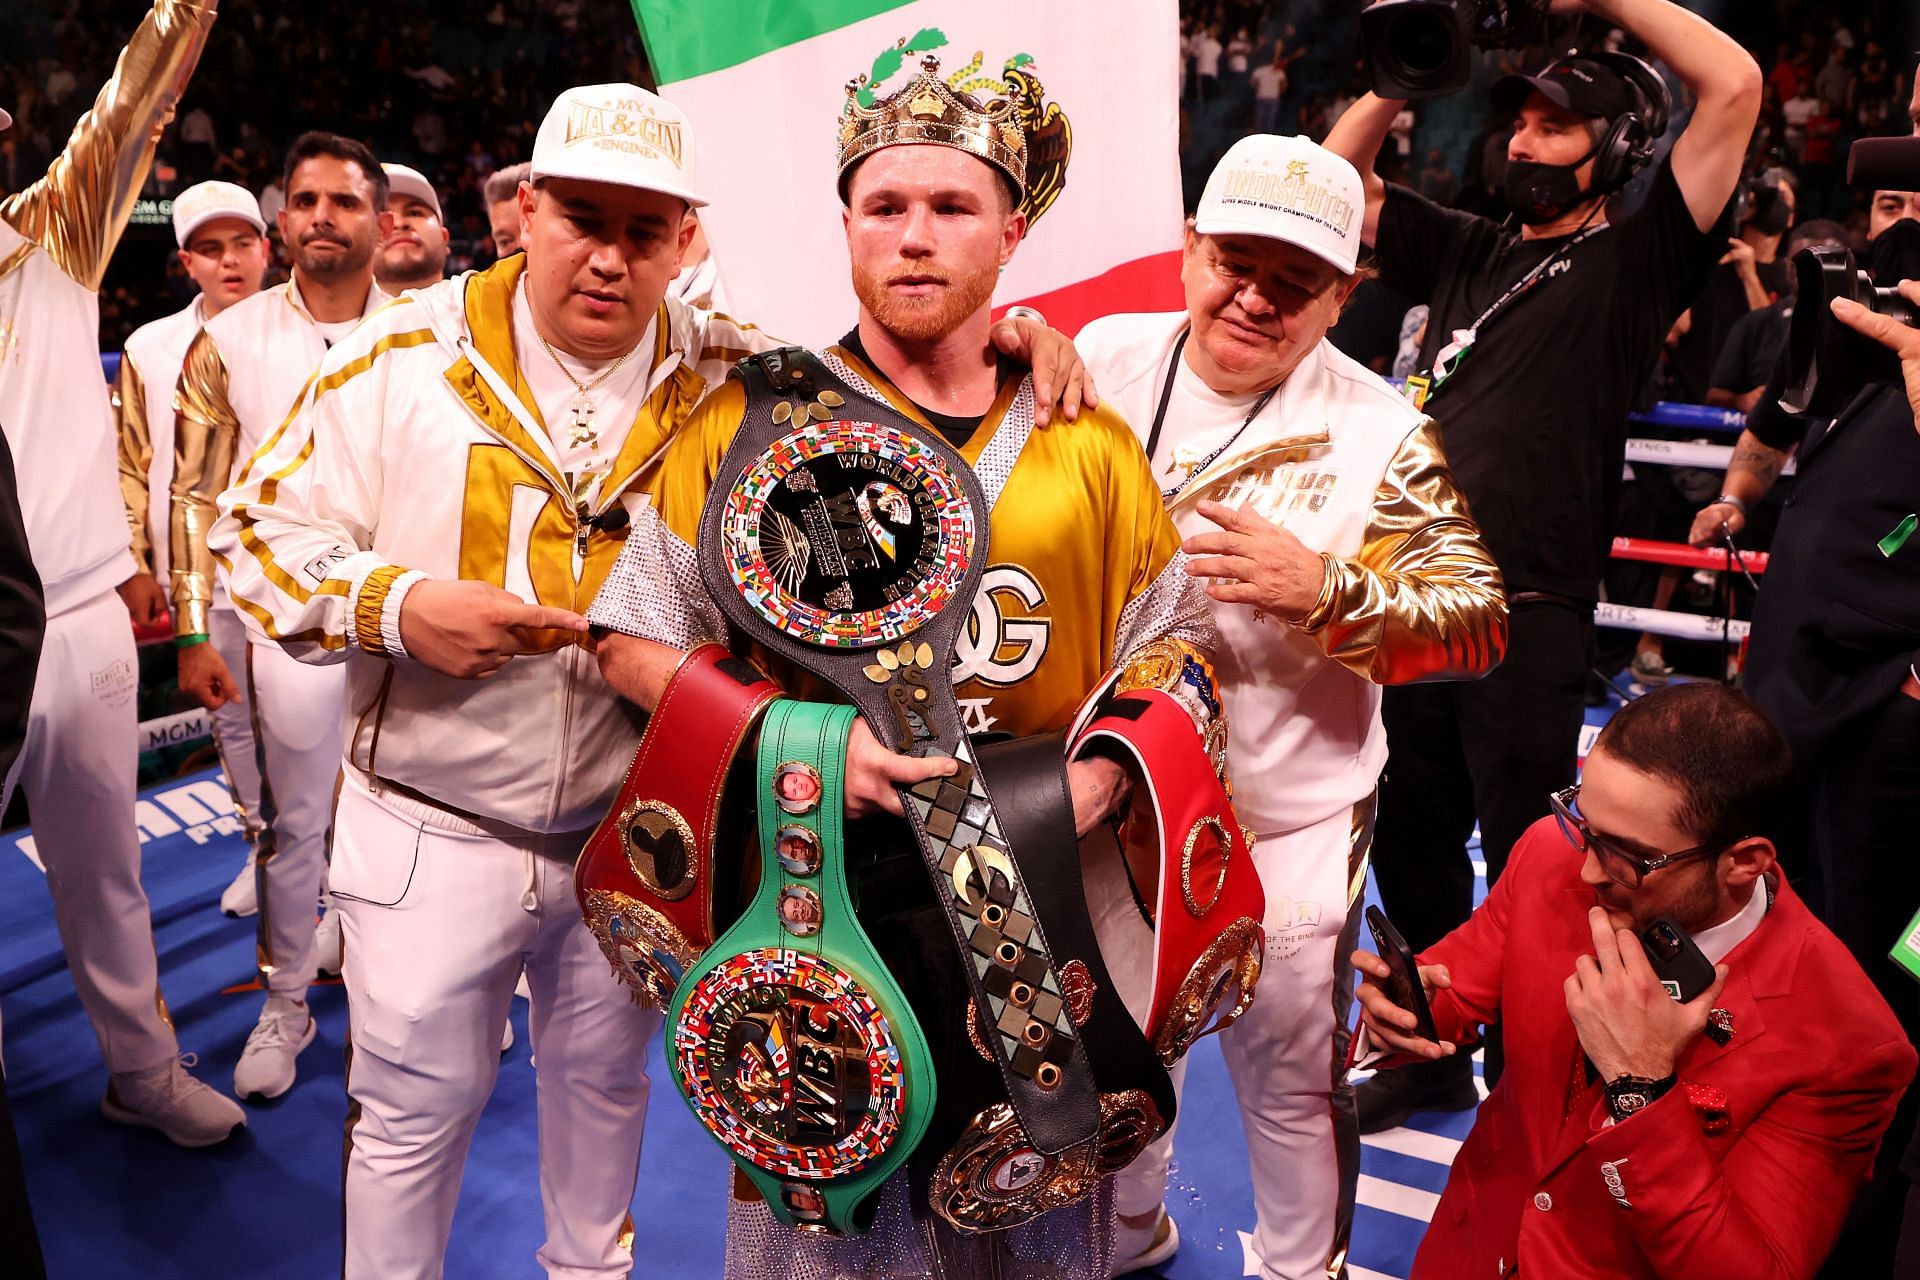 Canelo Alvarez became the first ever unified super-middleweight champion